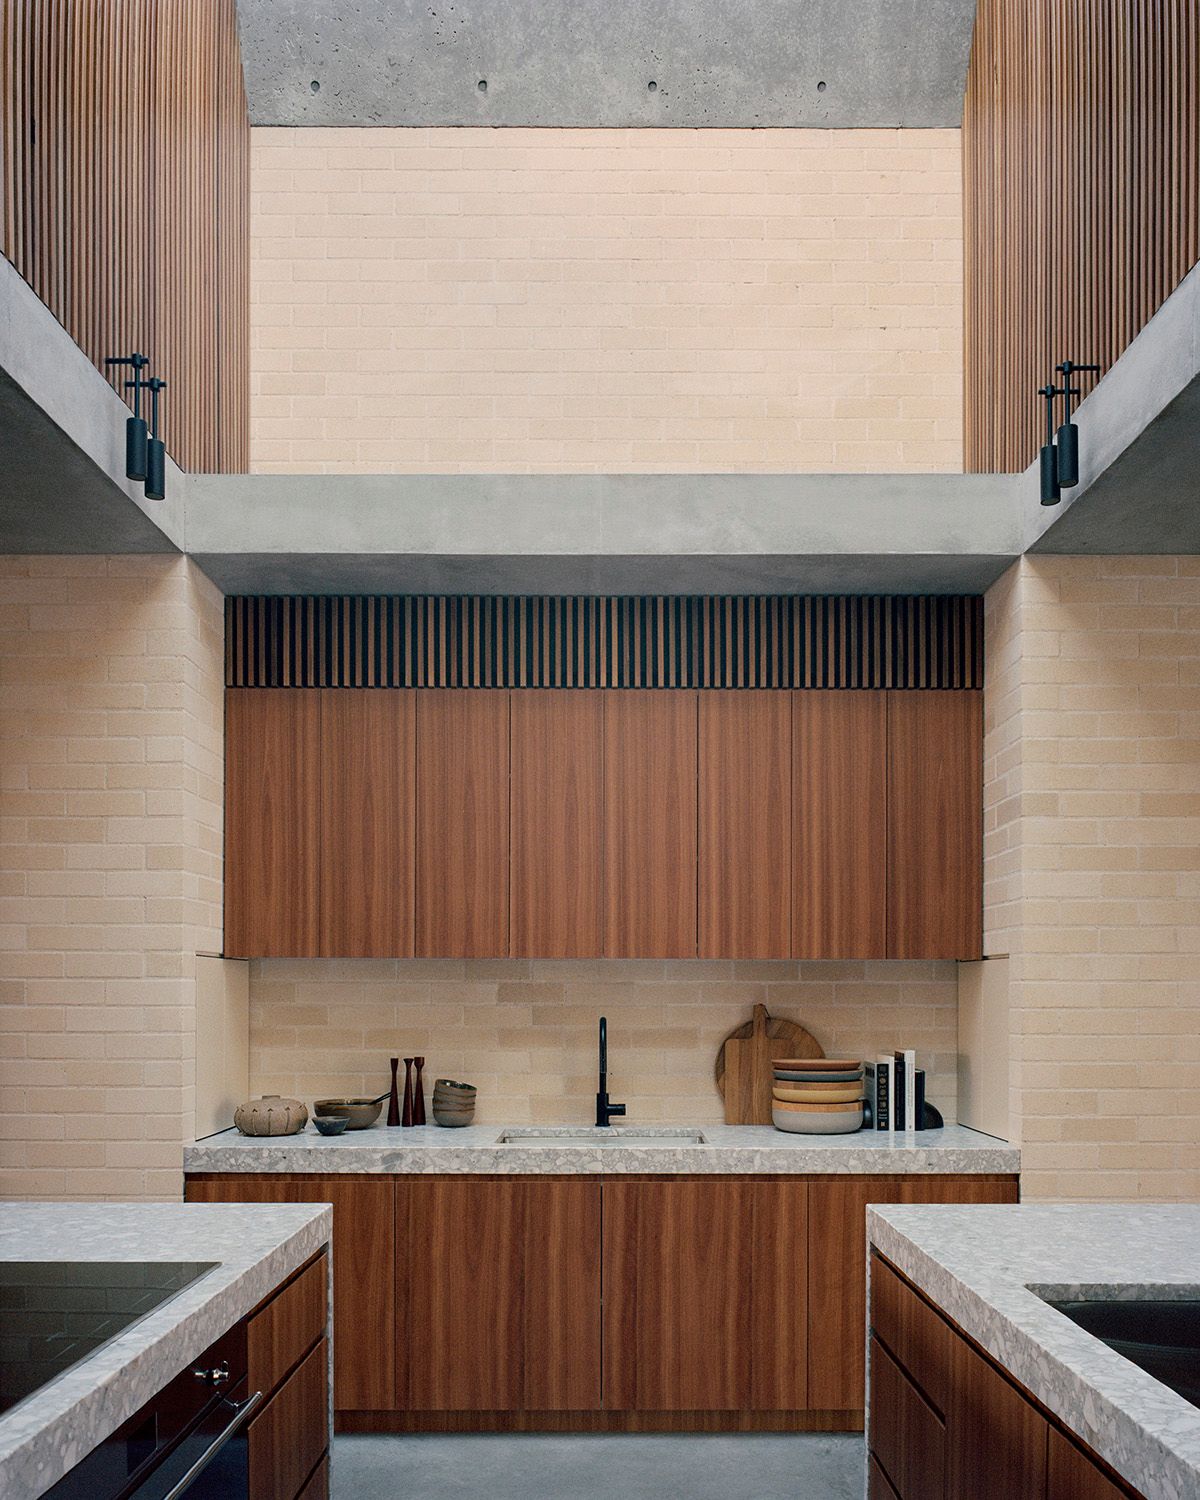 Bronte House by Tribe Studio Architects showing timber and brick kitchen with a void space over